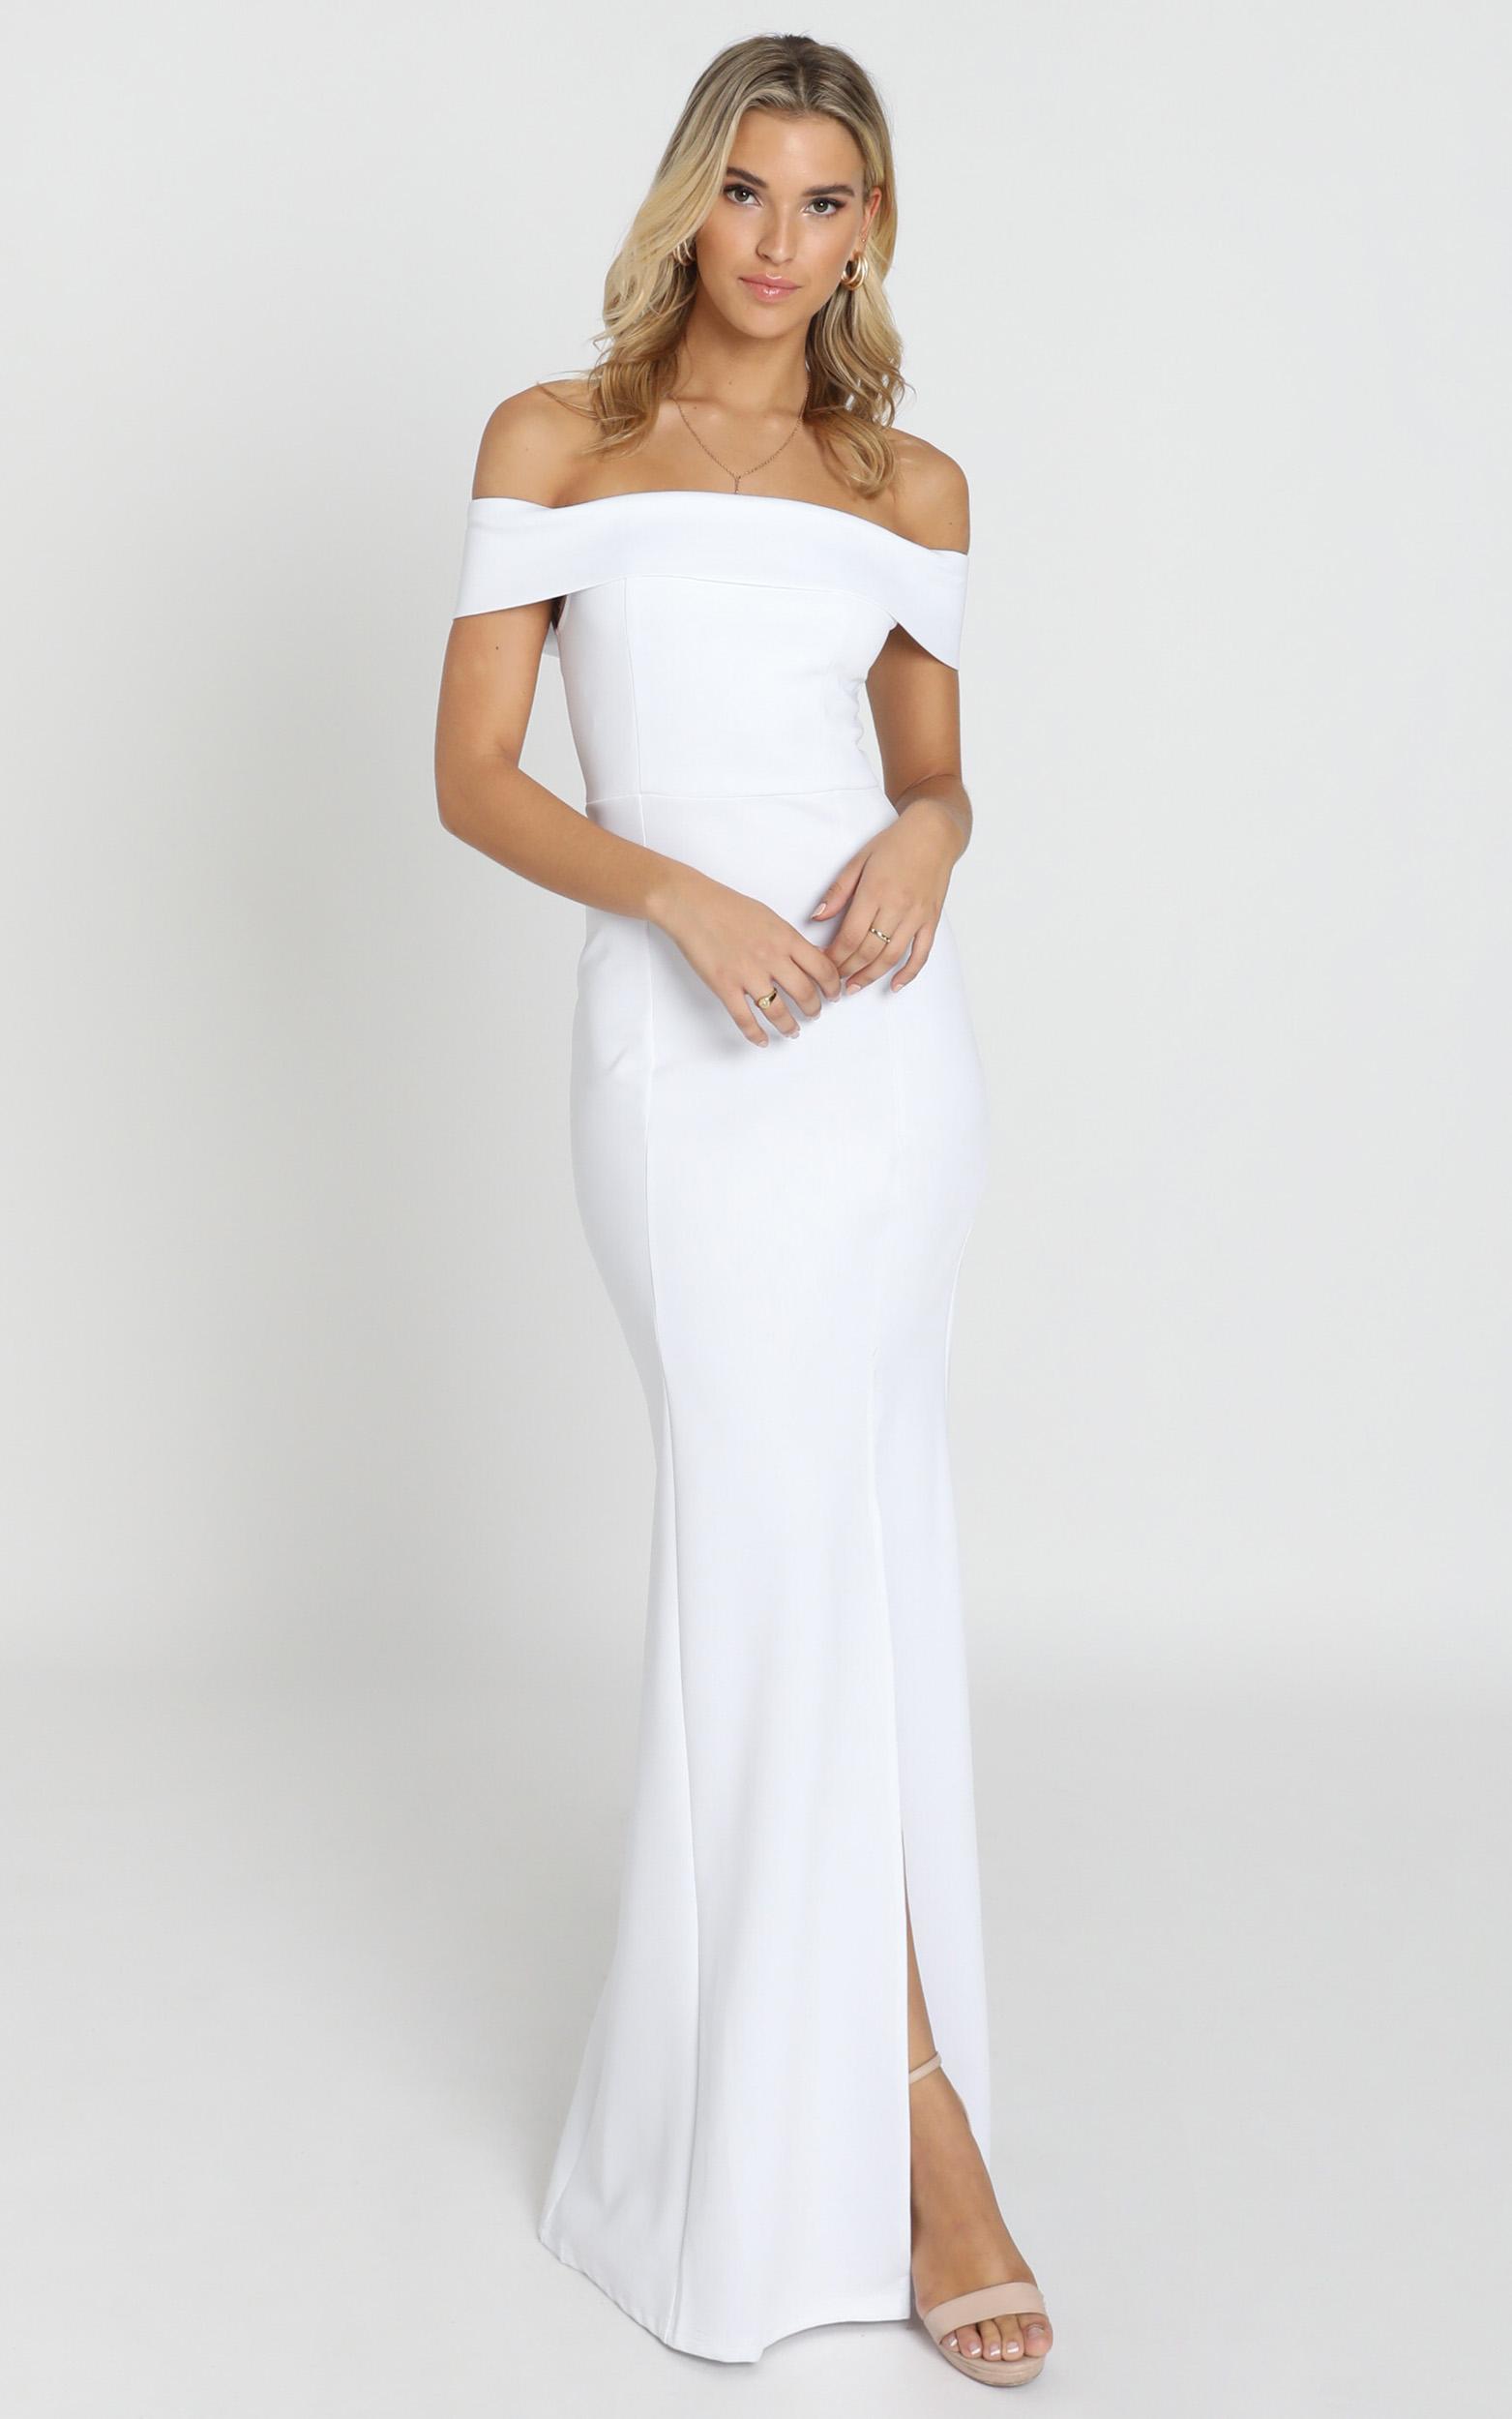 We Got This Feeling Dress in White - 14, WHT5, hi-res image number null